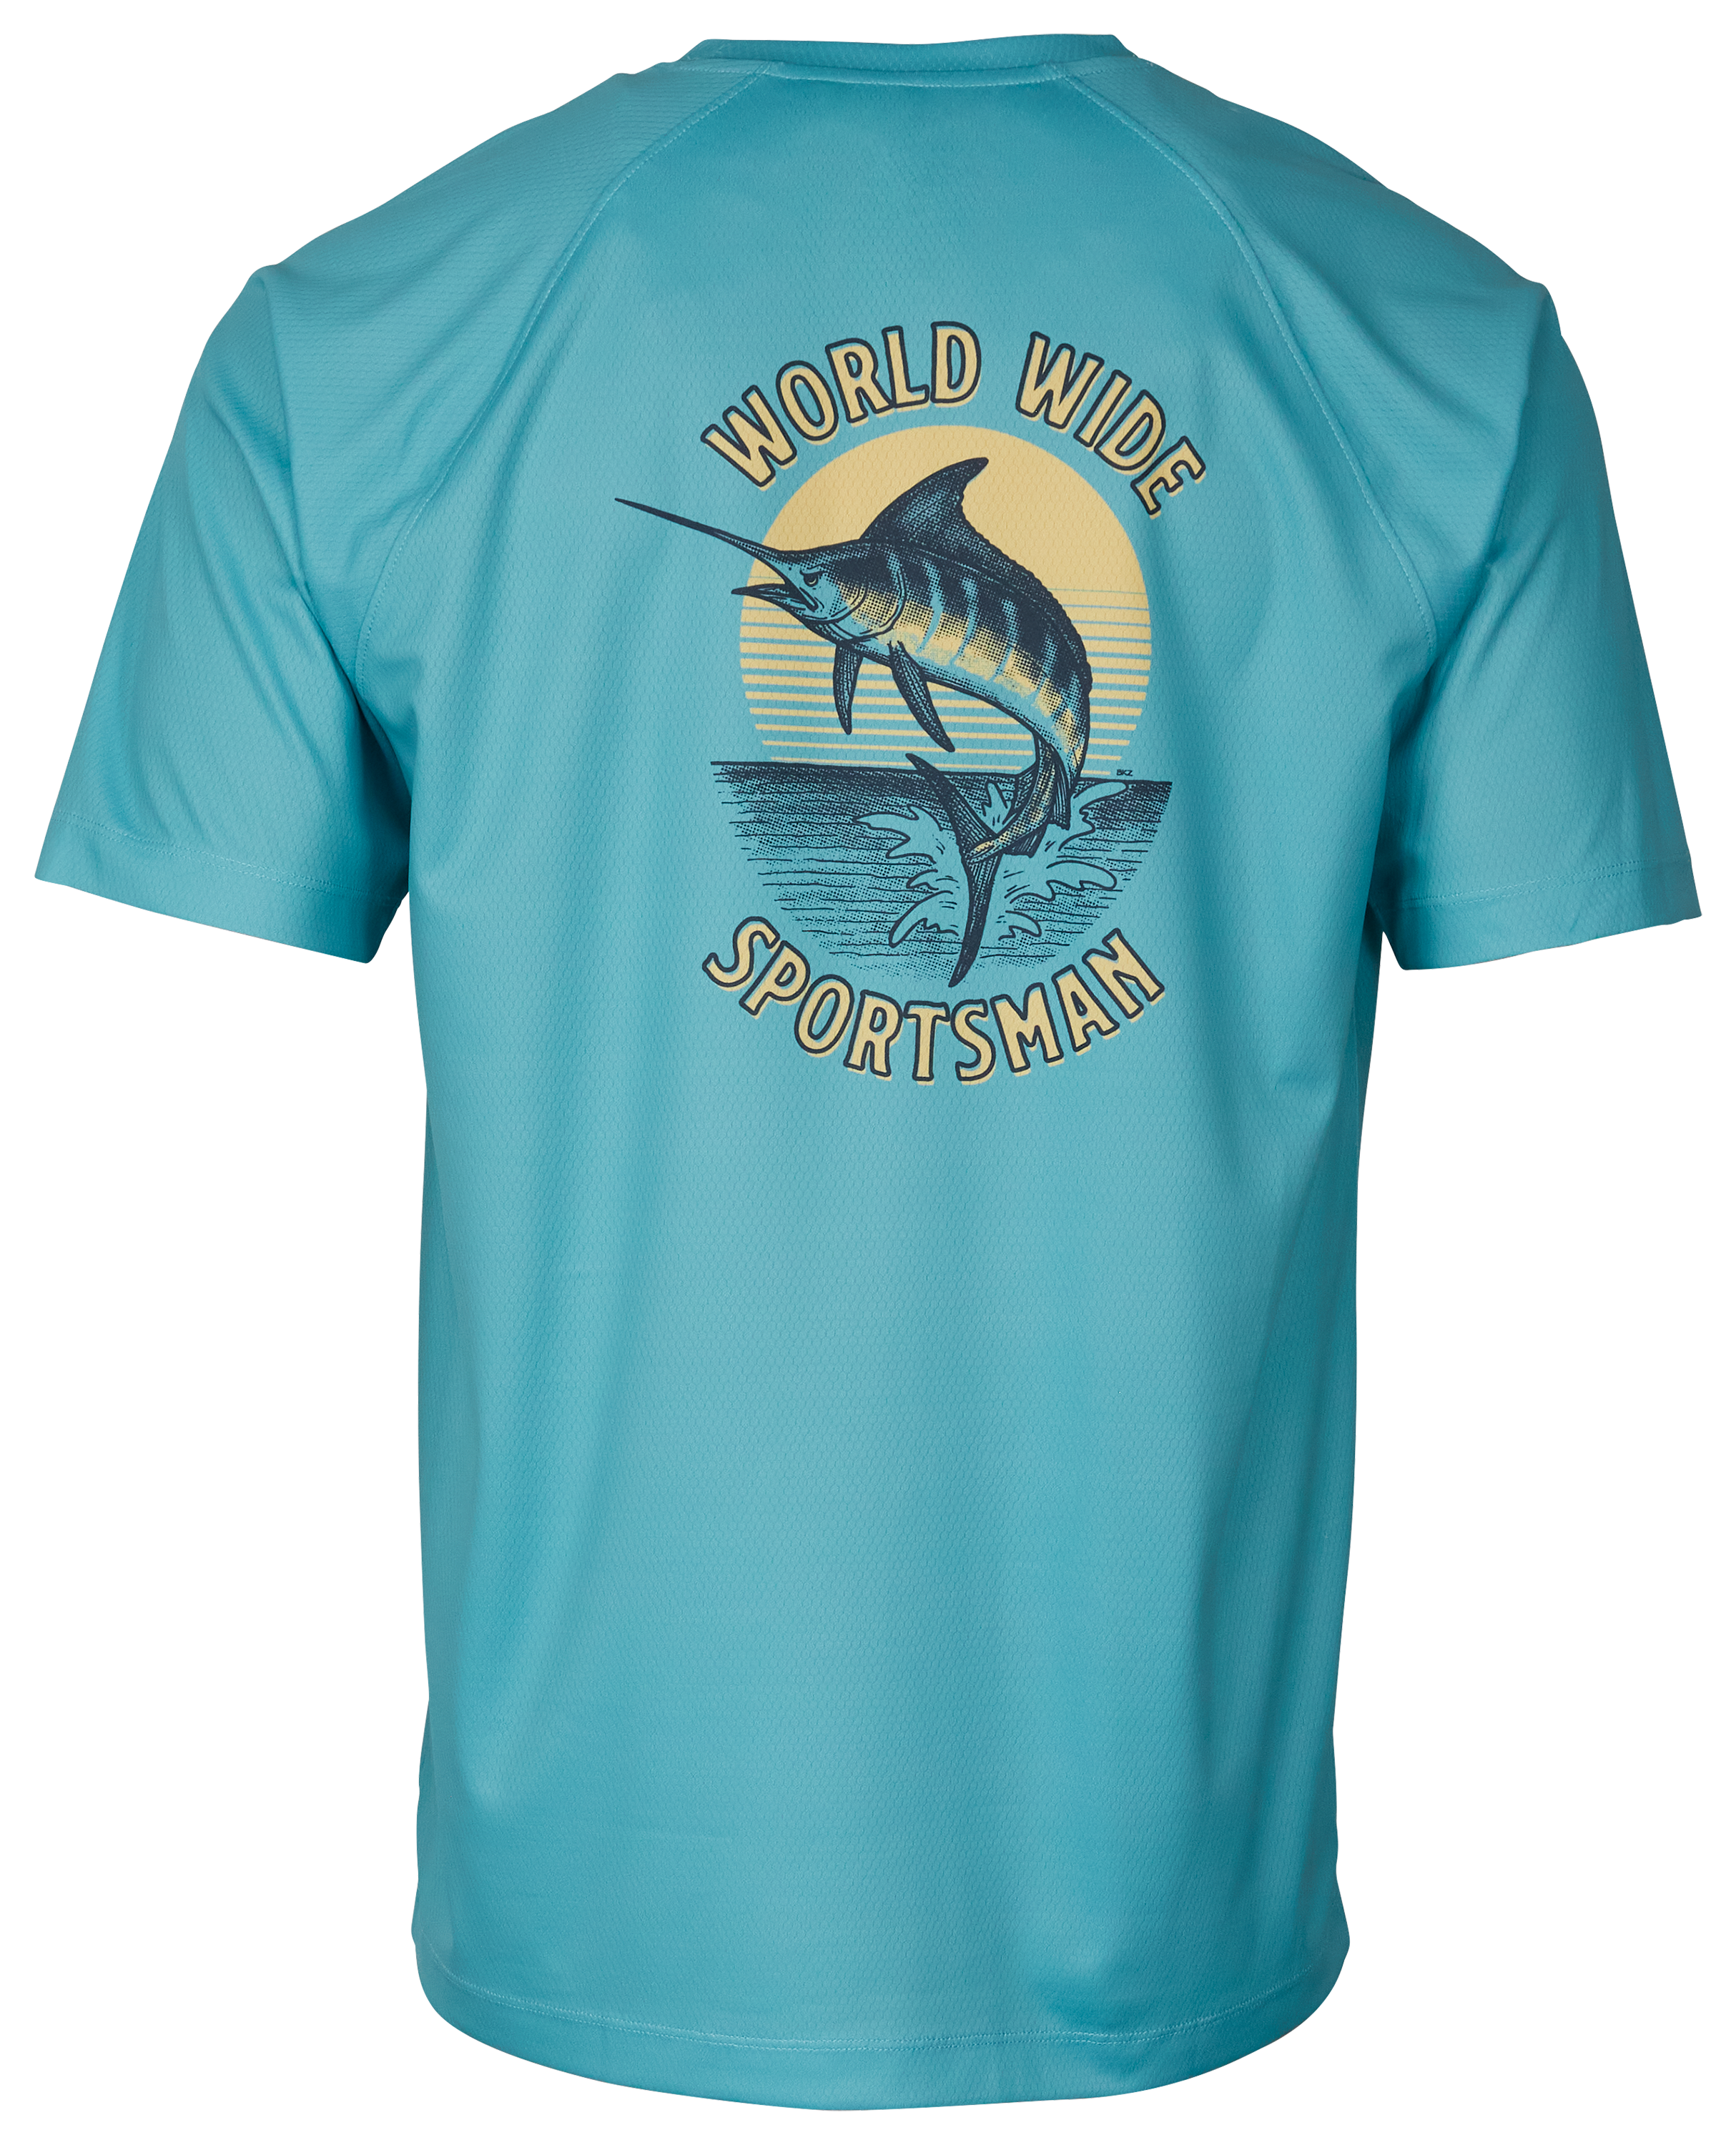 World Wide Sportsman Swordfish Sublimated Graphic Short-Sleeve T-Shirt For Men - Reef Waters - 3XL